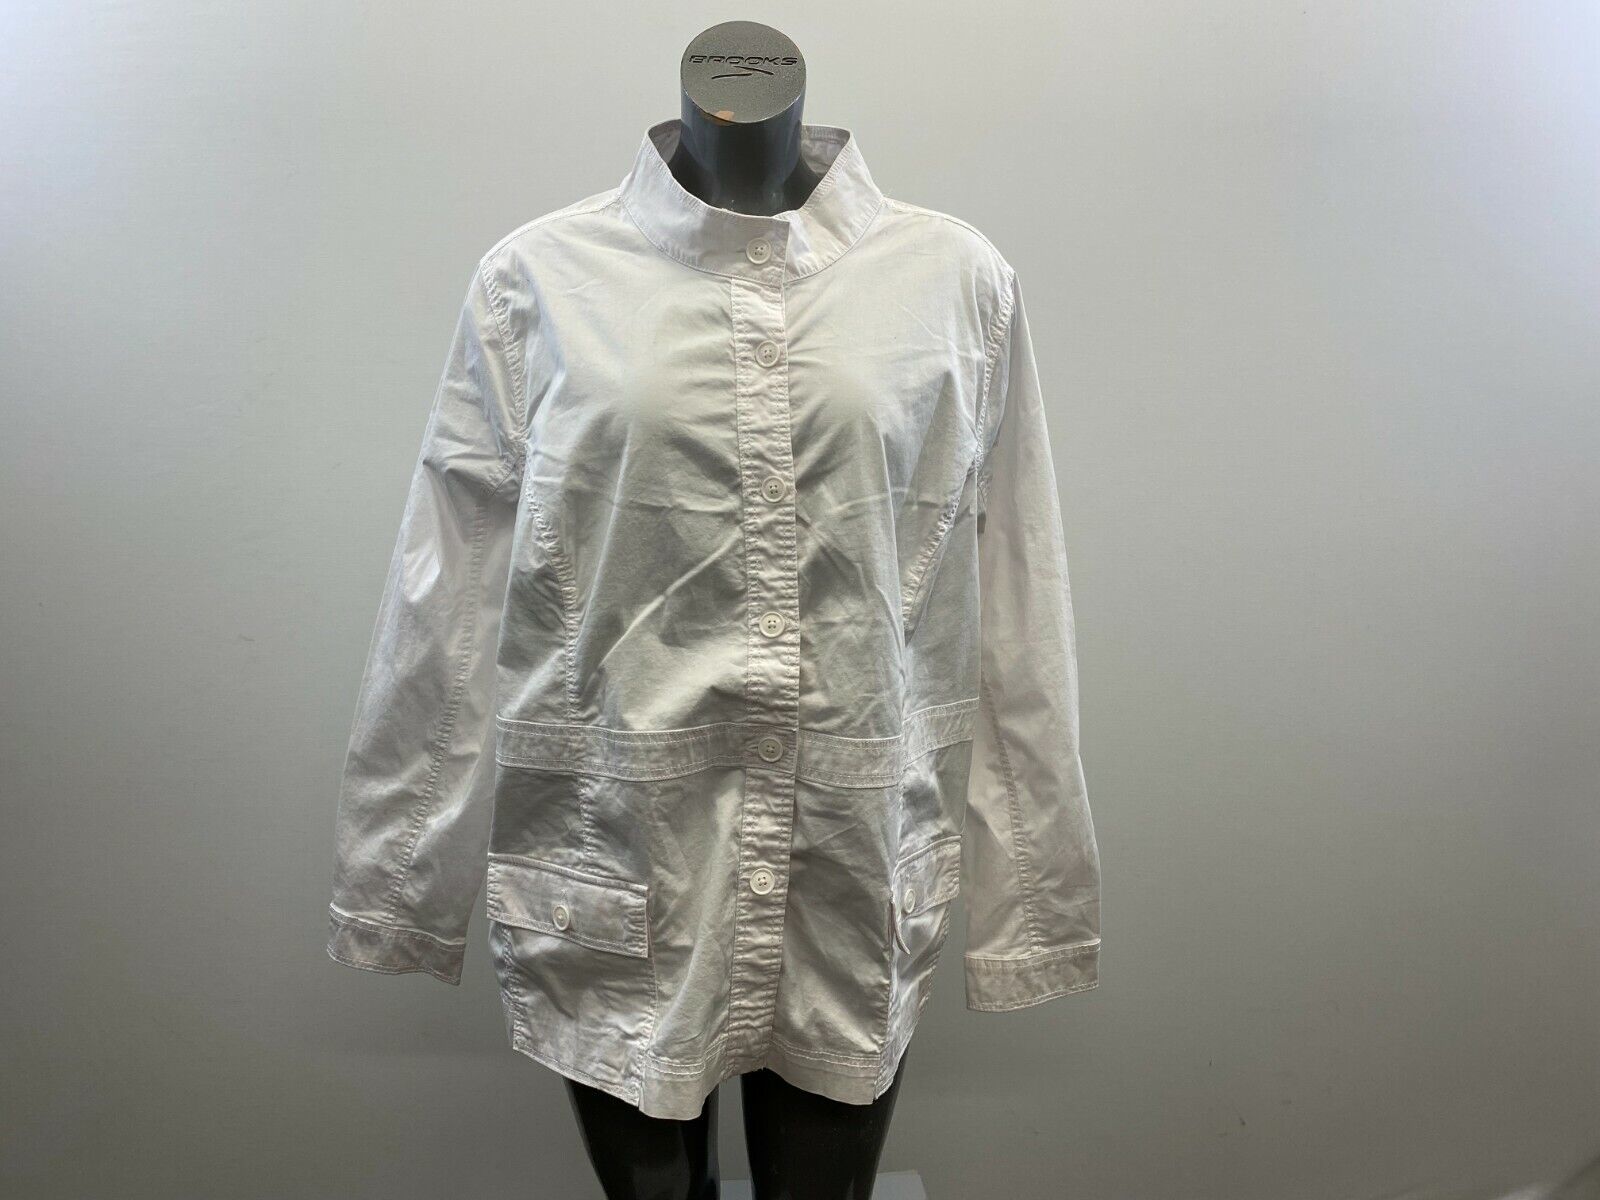 Primary image for Penningtons Women's Button Up Jacket Size 3X White Long Sleeve Cotton Blend